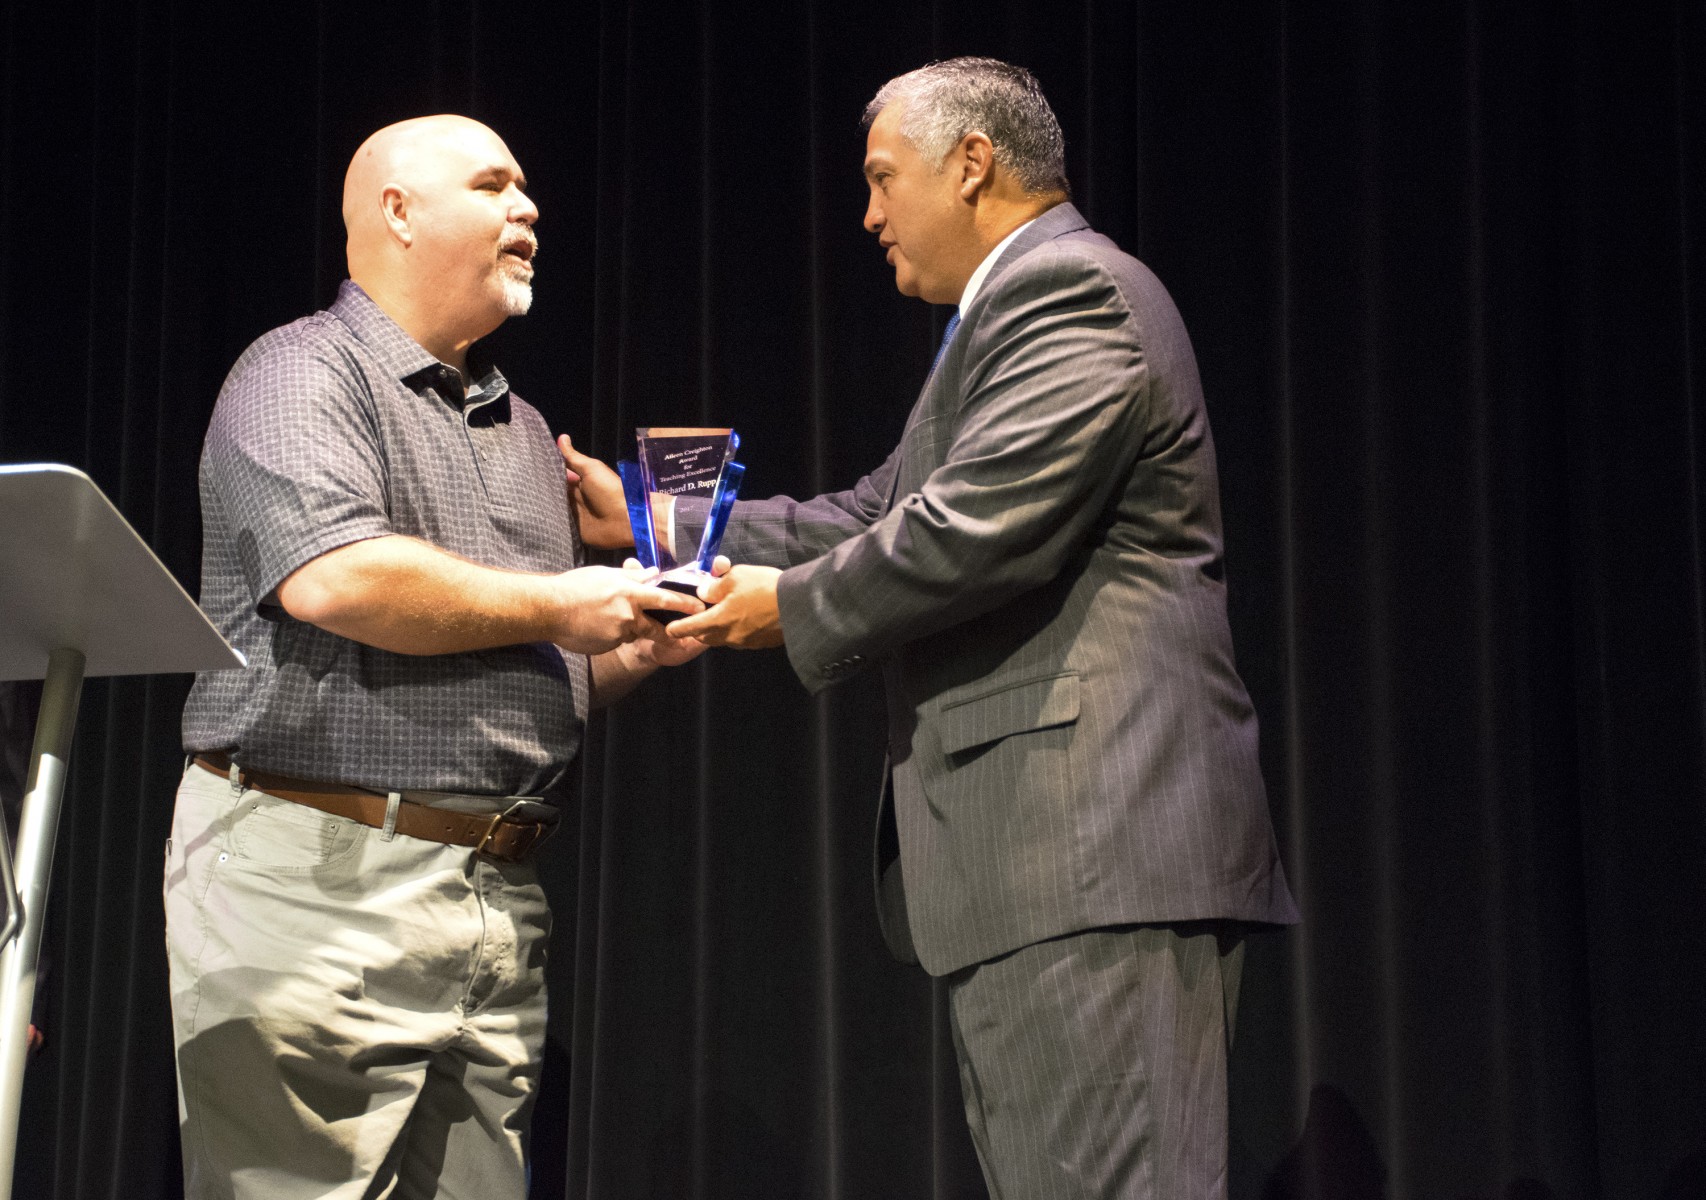 Richard Rupp accepts an award on stage from President Mark Escamilla.